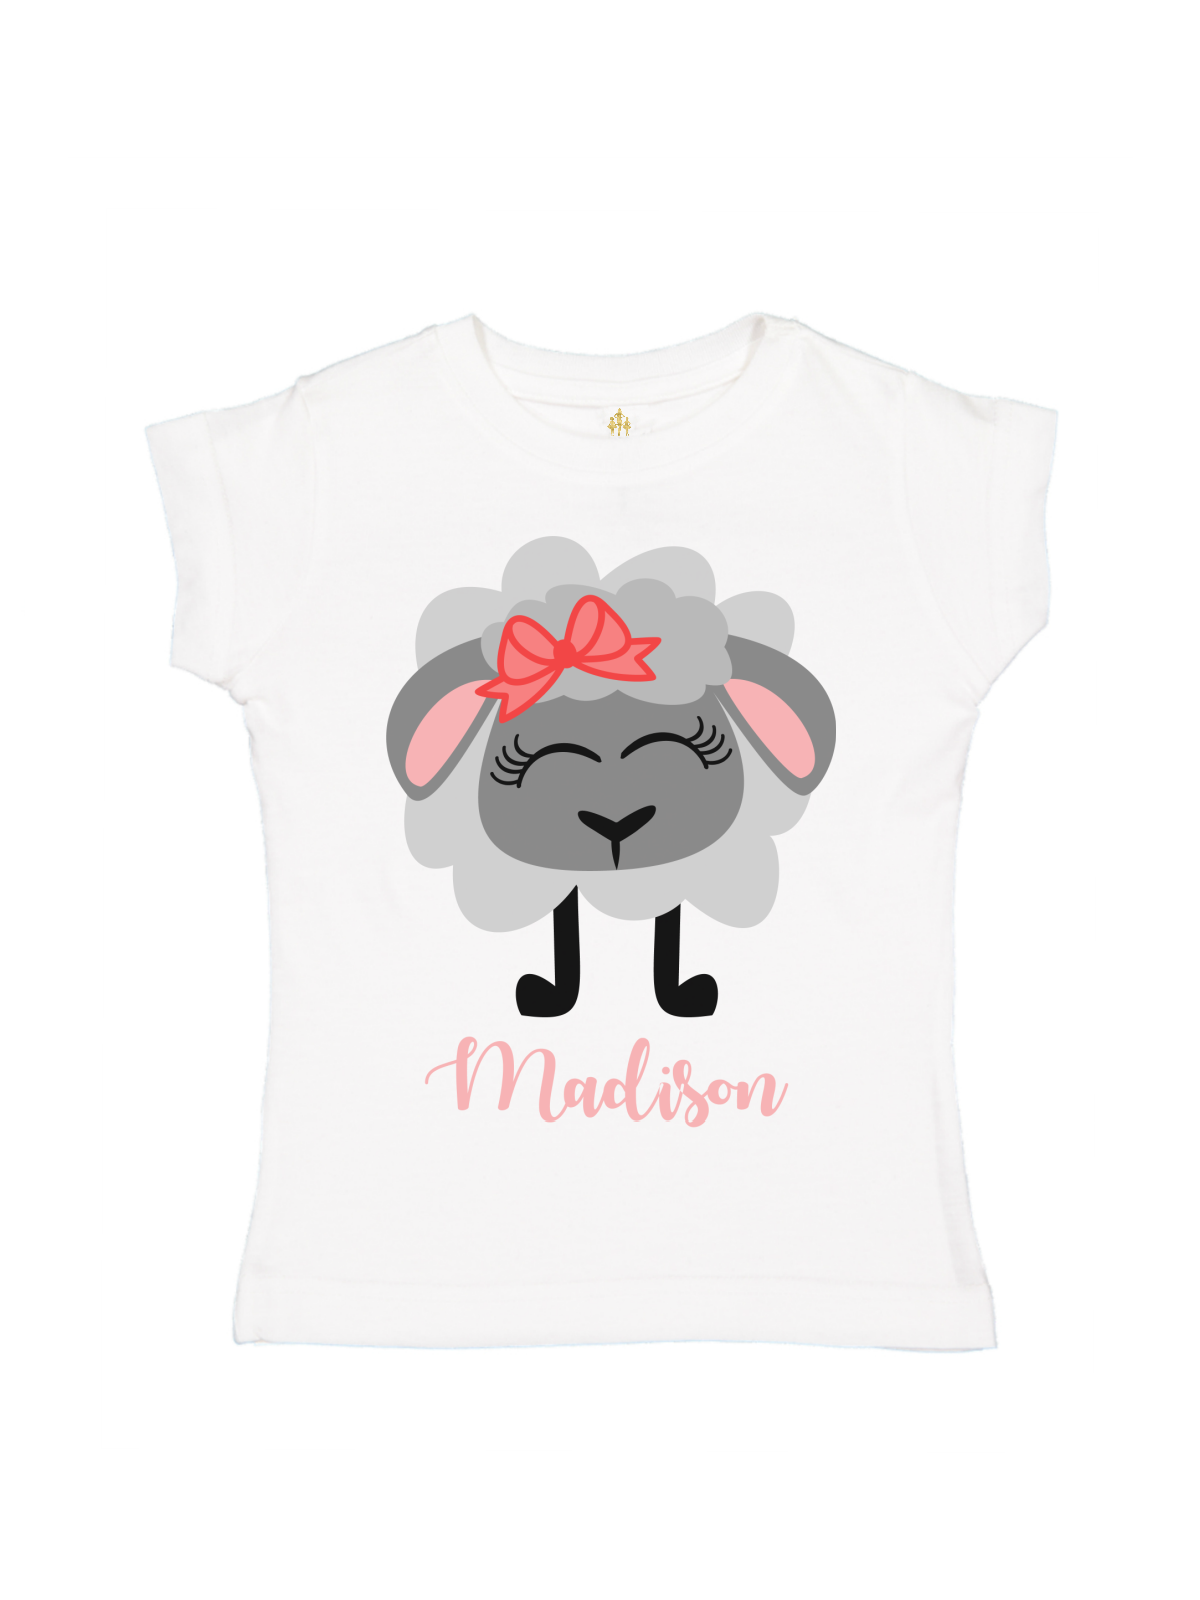 personalized girl's Valentine's Day t-shirt